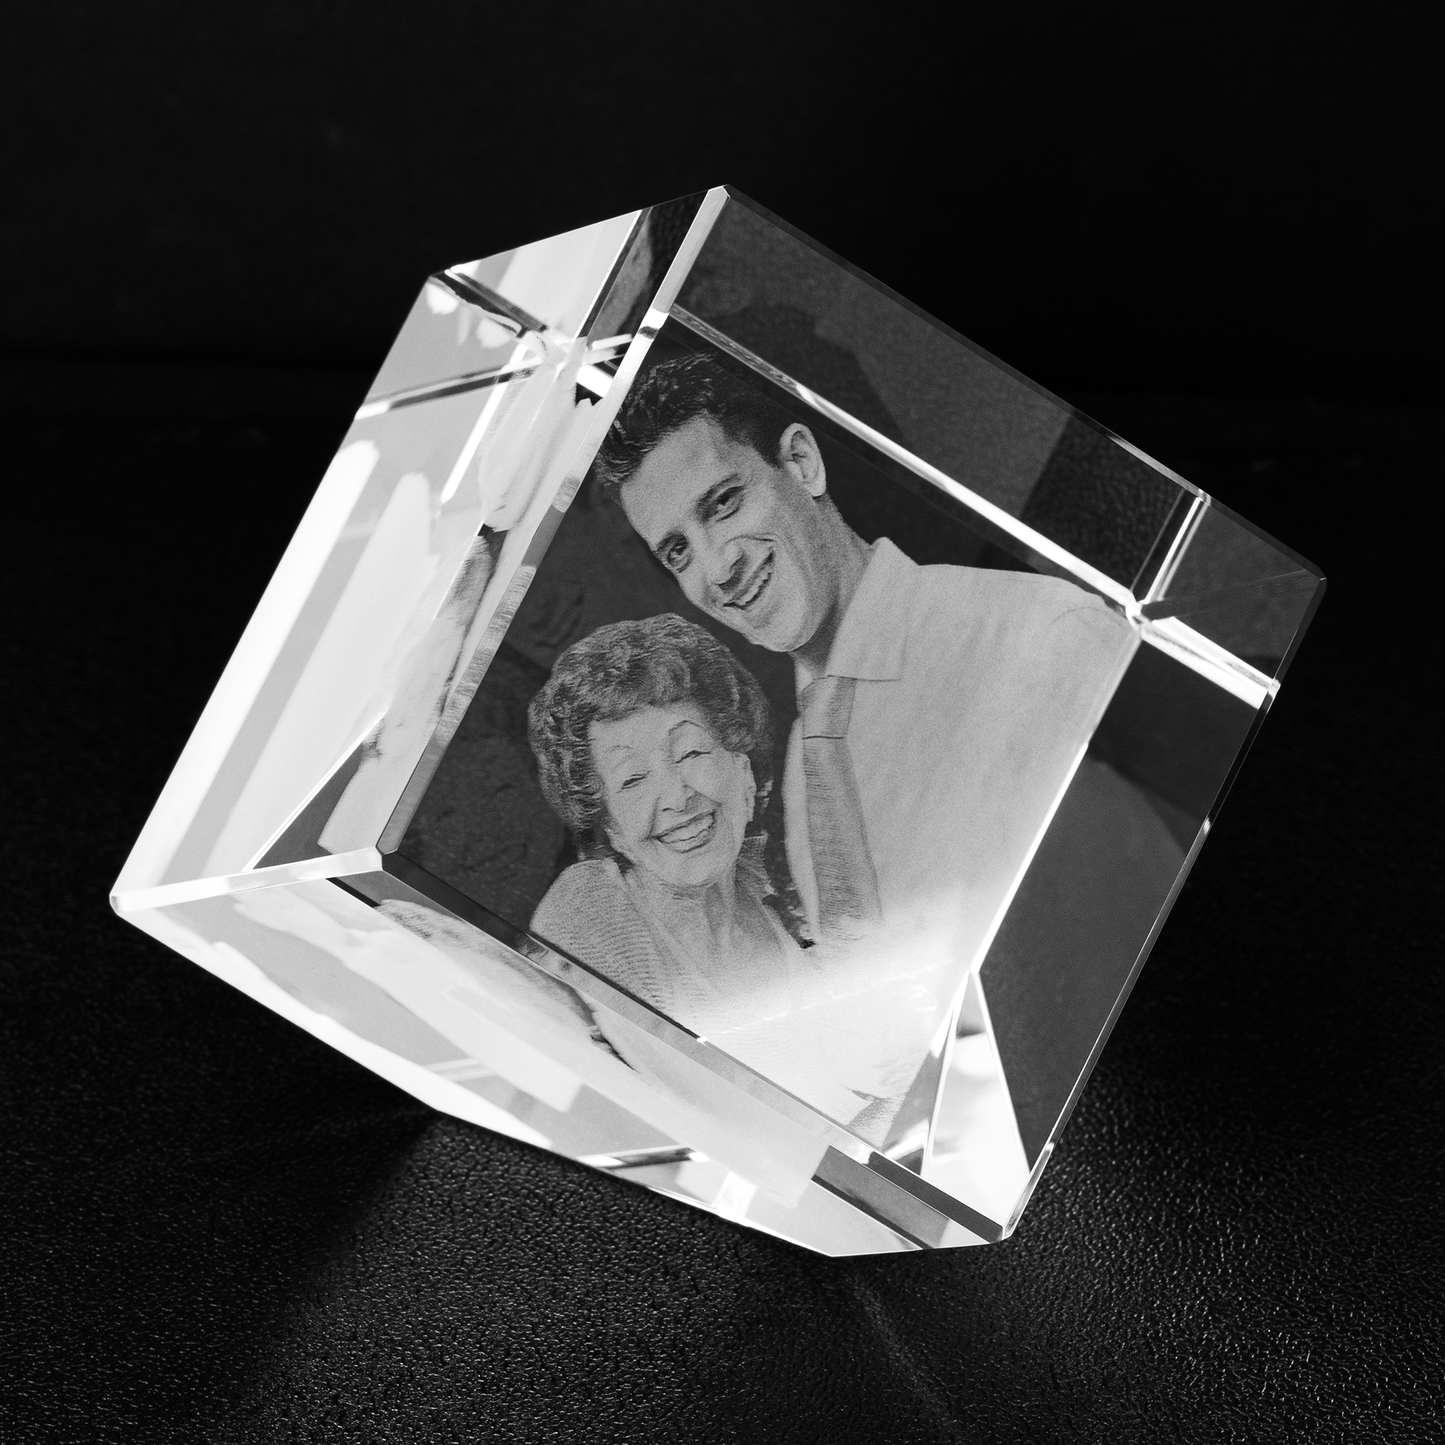 Personalized Crystal Decoration. Gift for Weddings, Anniversaries, Birthdays, Graduation, Other Special Occasion